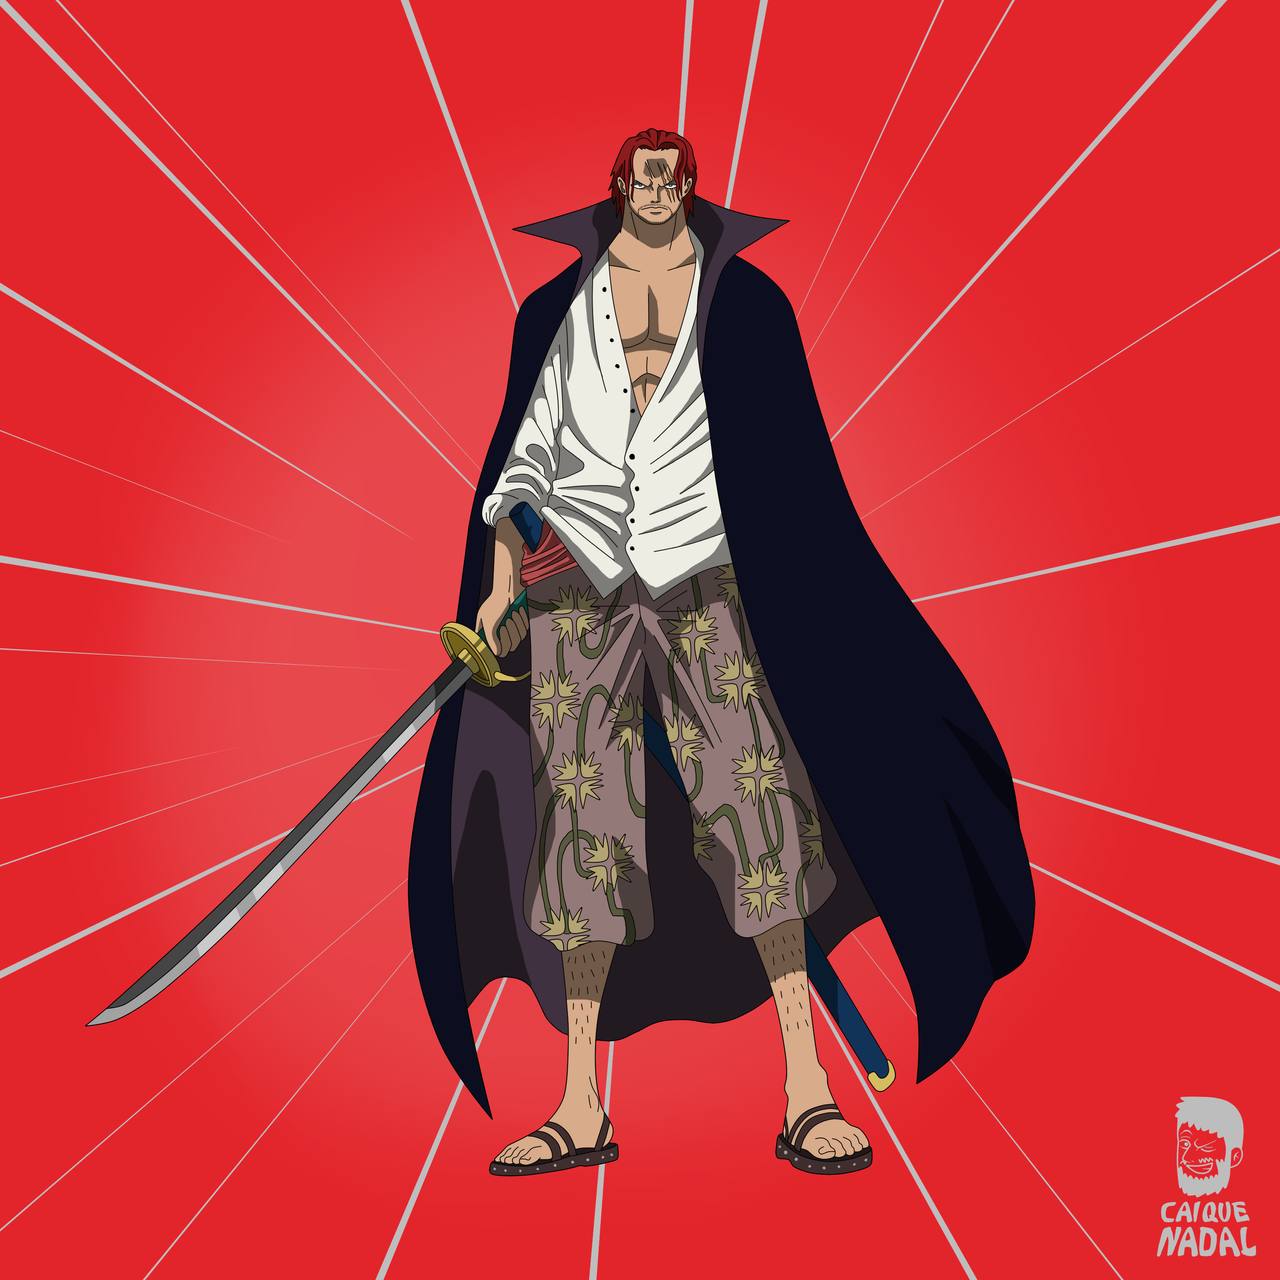 King - One Piece by caiquenadal on DeviantArt